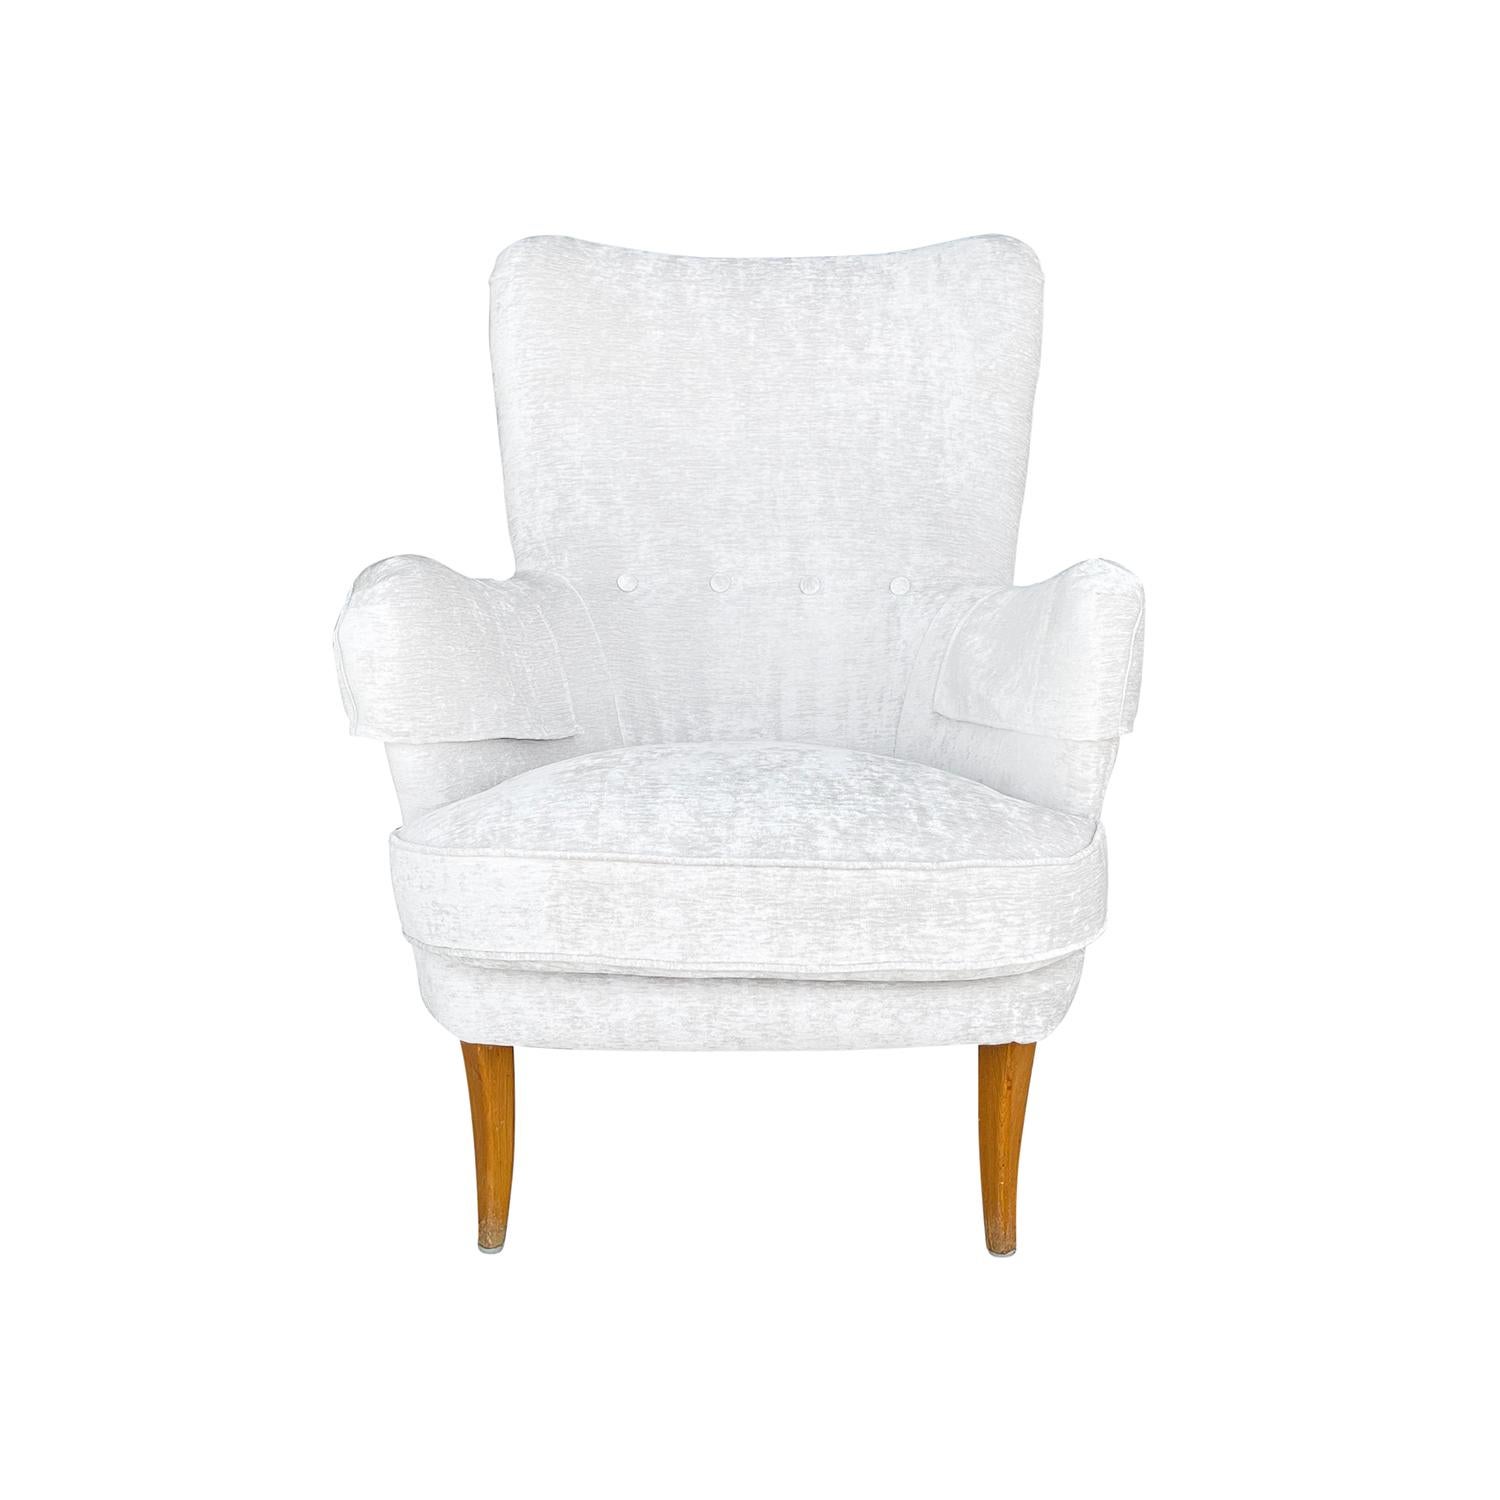 A white-grey, vintage Mid-Century Modern Swedish anonymous armchair with two pillows, designed by Carl Malmsten, in good condition. The seat backrest of single Scandinavian Little Furulid side chair is slightly curved with outstretched arms,